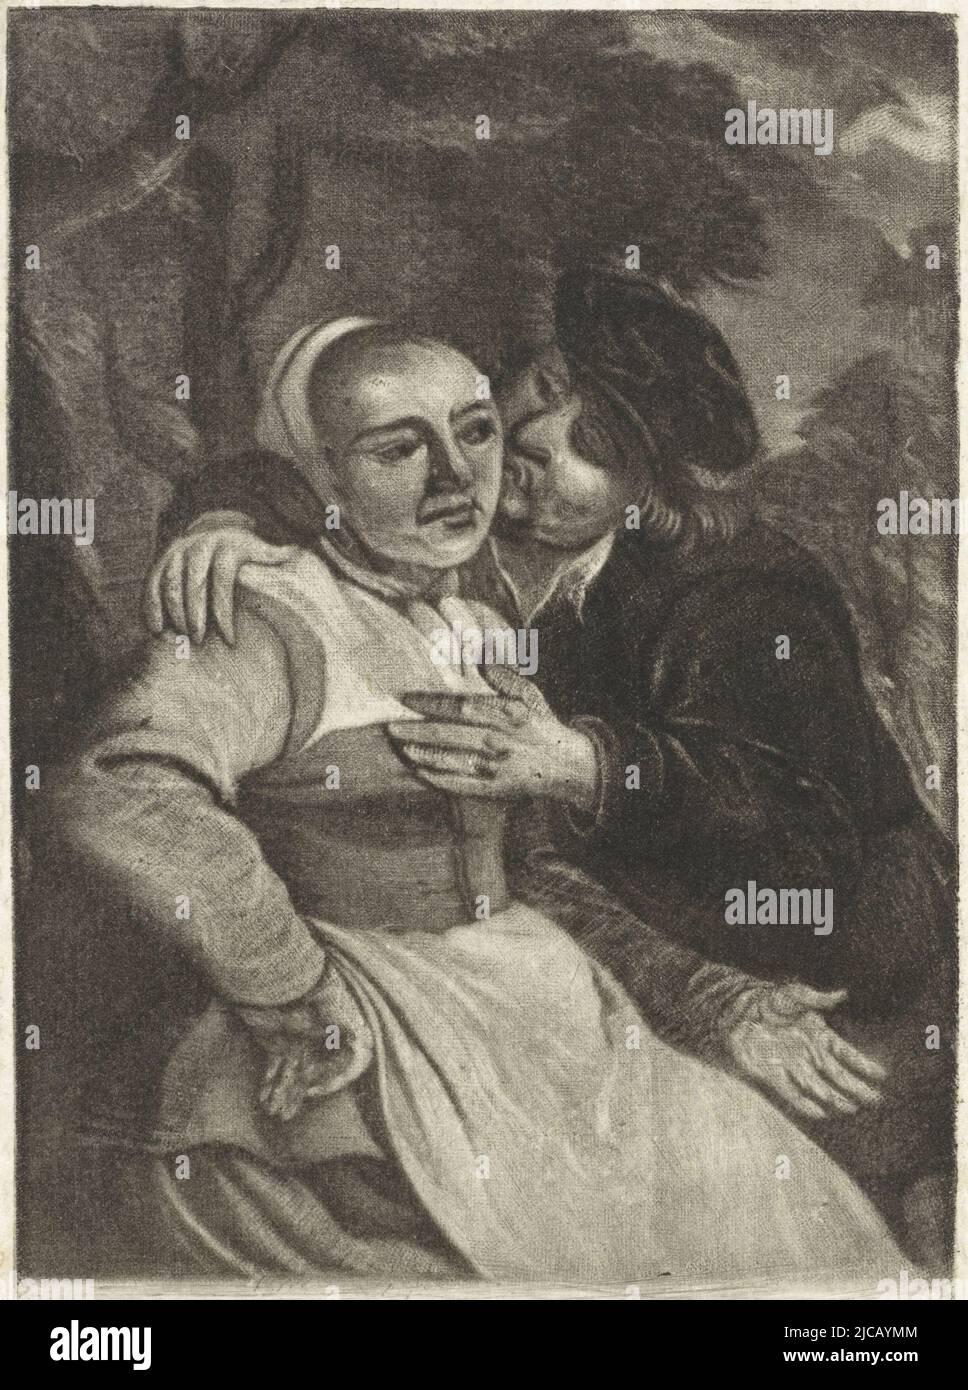 A man embraces a woman and gives her a kiss on the cheek She holds up her hand, Man embraces a woman, print maker: Dirk Koedijck, (mentioned on object), Jan Miense Molenaer, (mentioned on object), Zaandam, 1731, paper, engraving, h 139 mm × w 95 mm Stock Photo